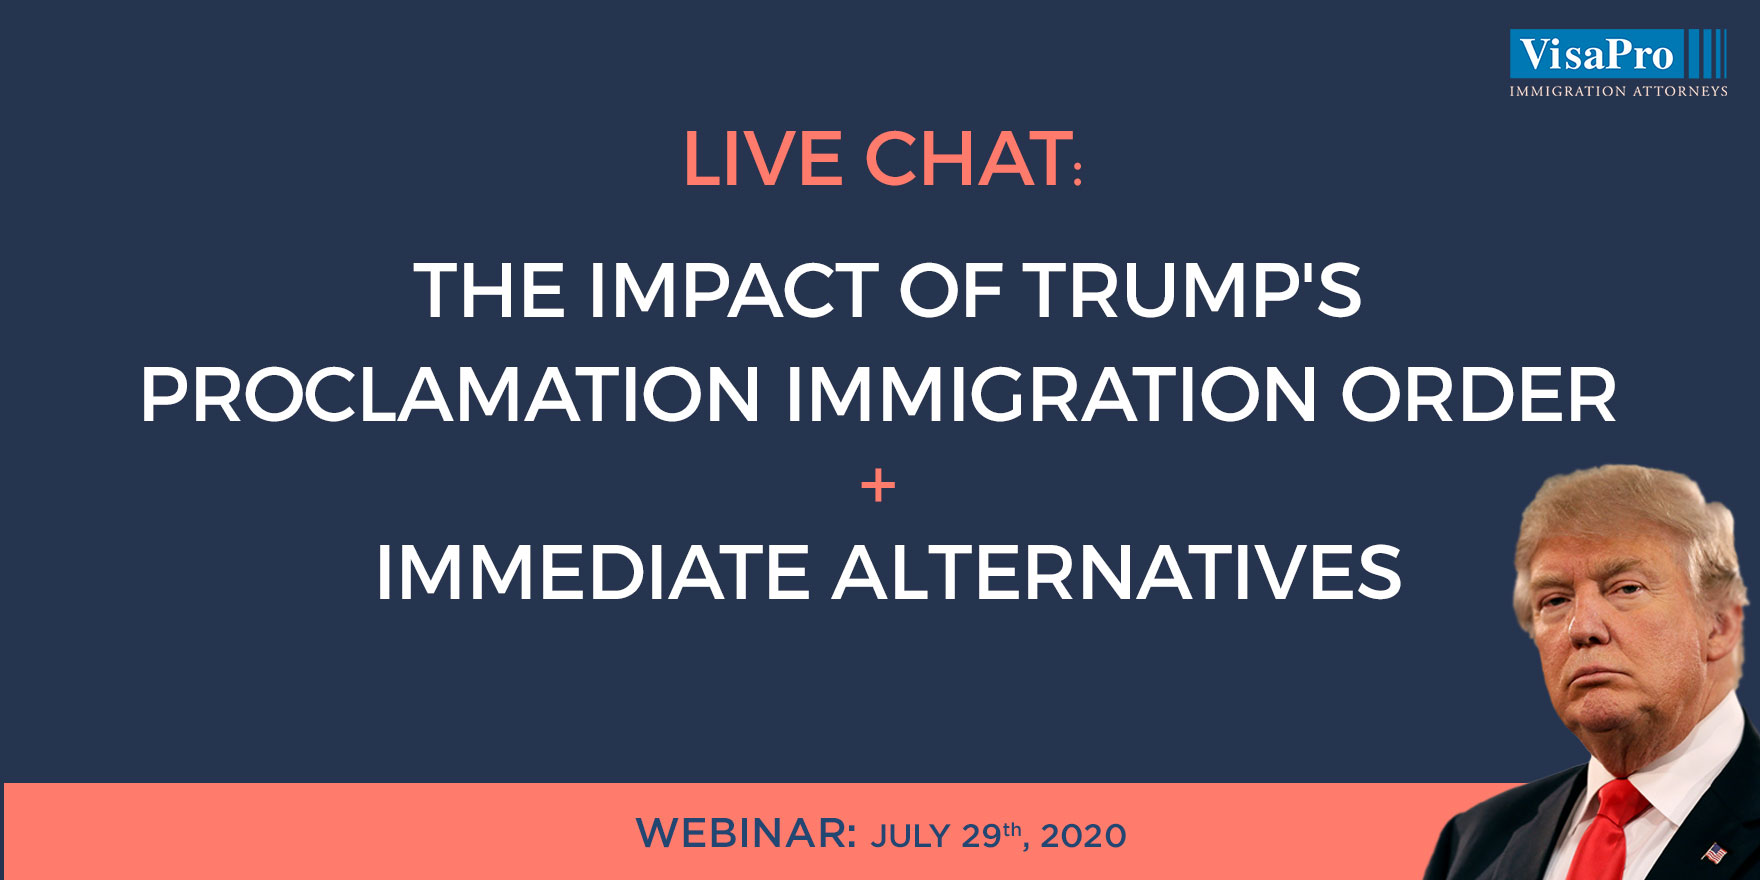 Live Chat: The Impact of Trump's Proclamation Immigration Order + Immediate Alternatives, Ottawa, Ontario, Canada